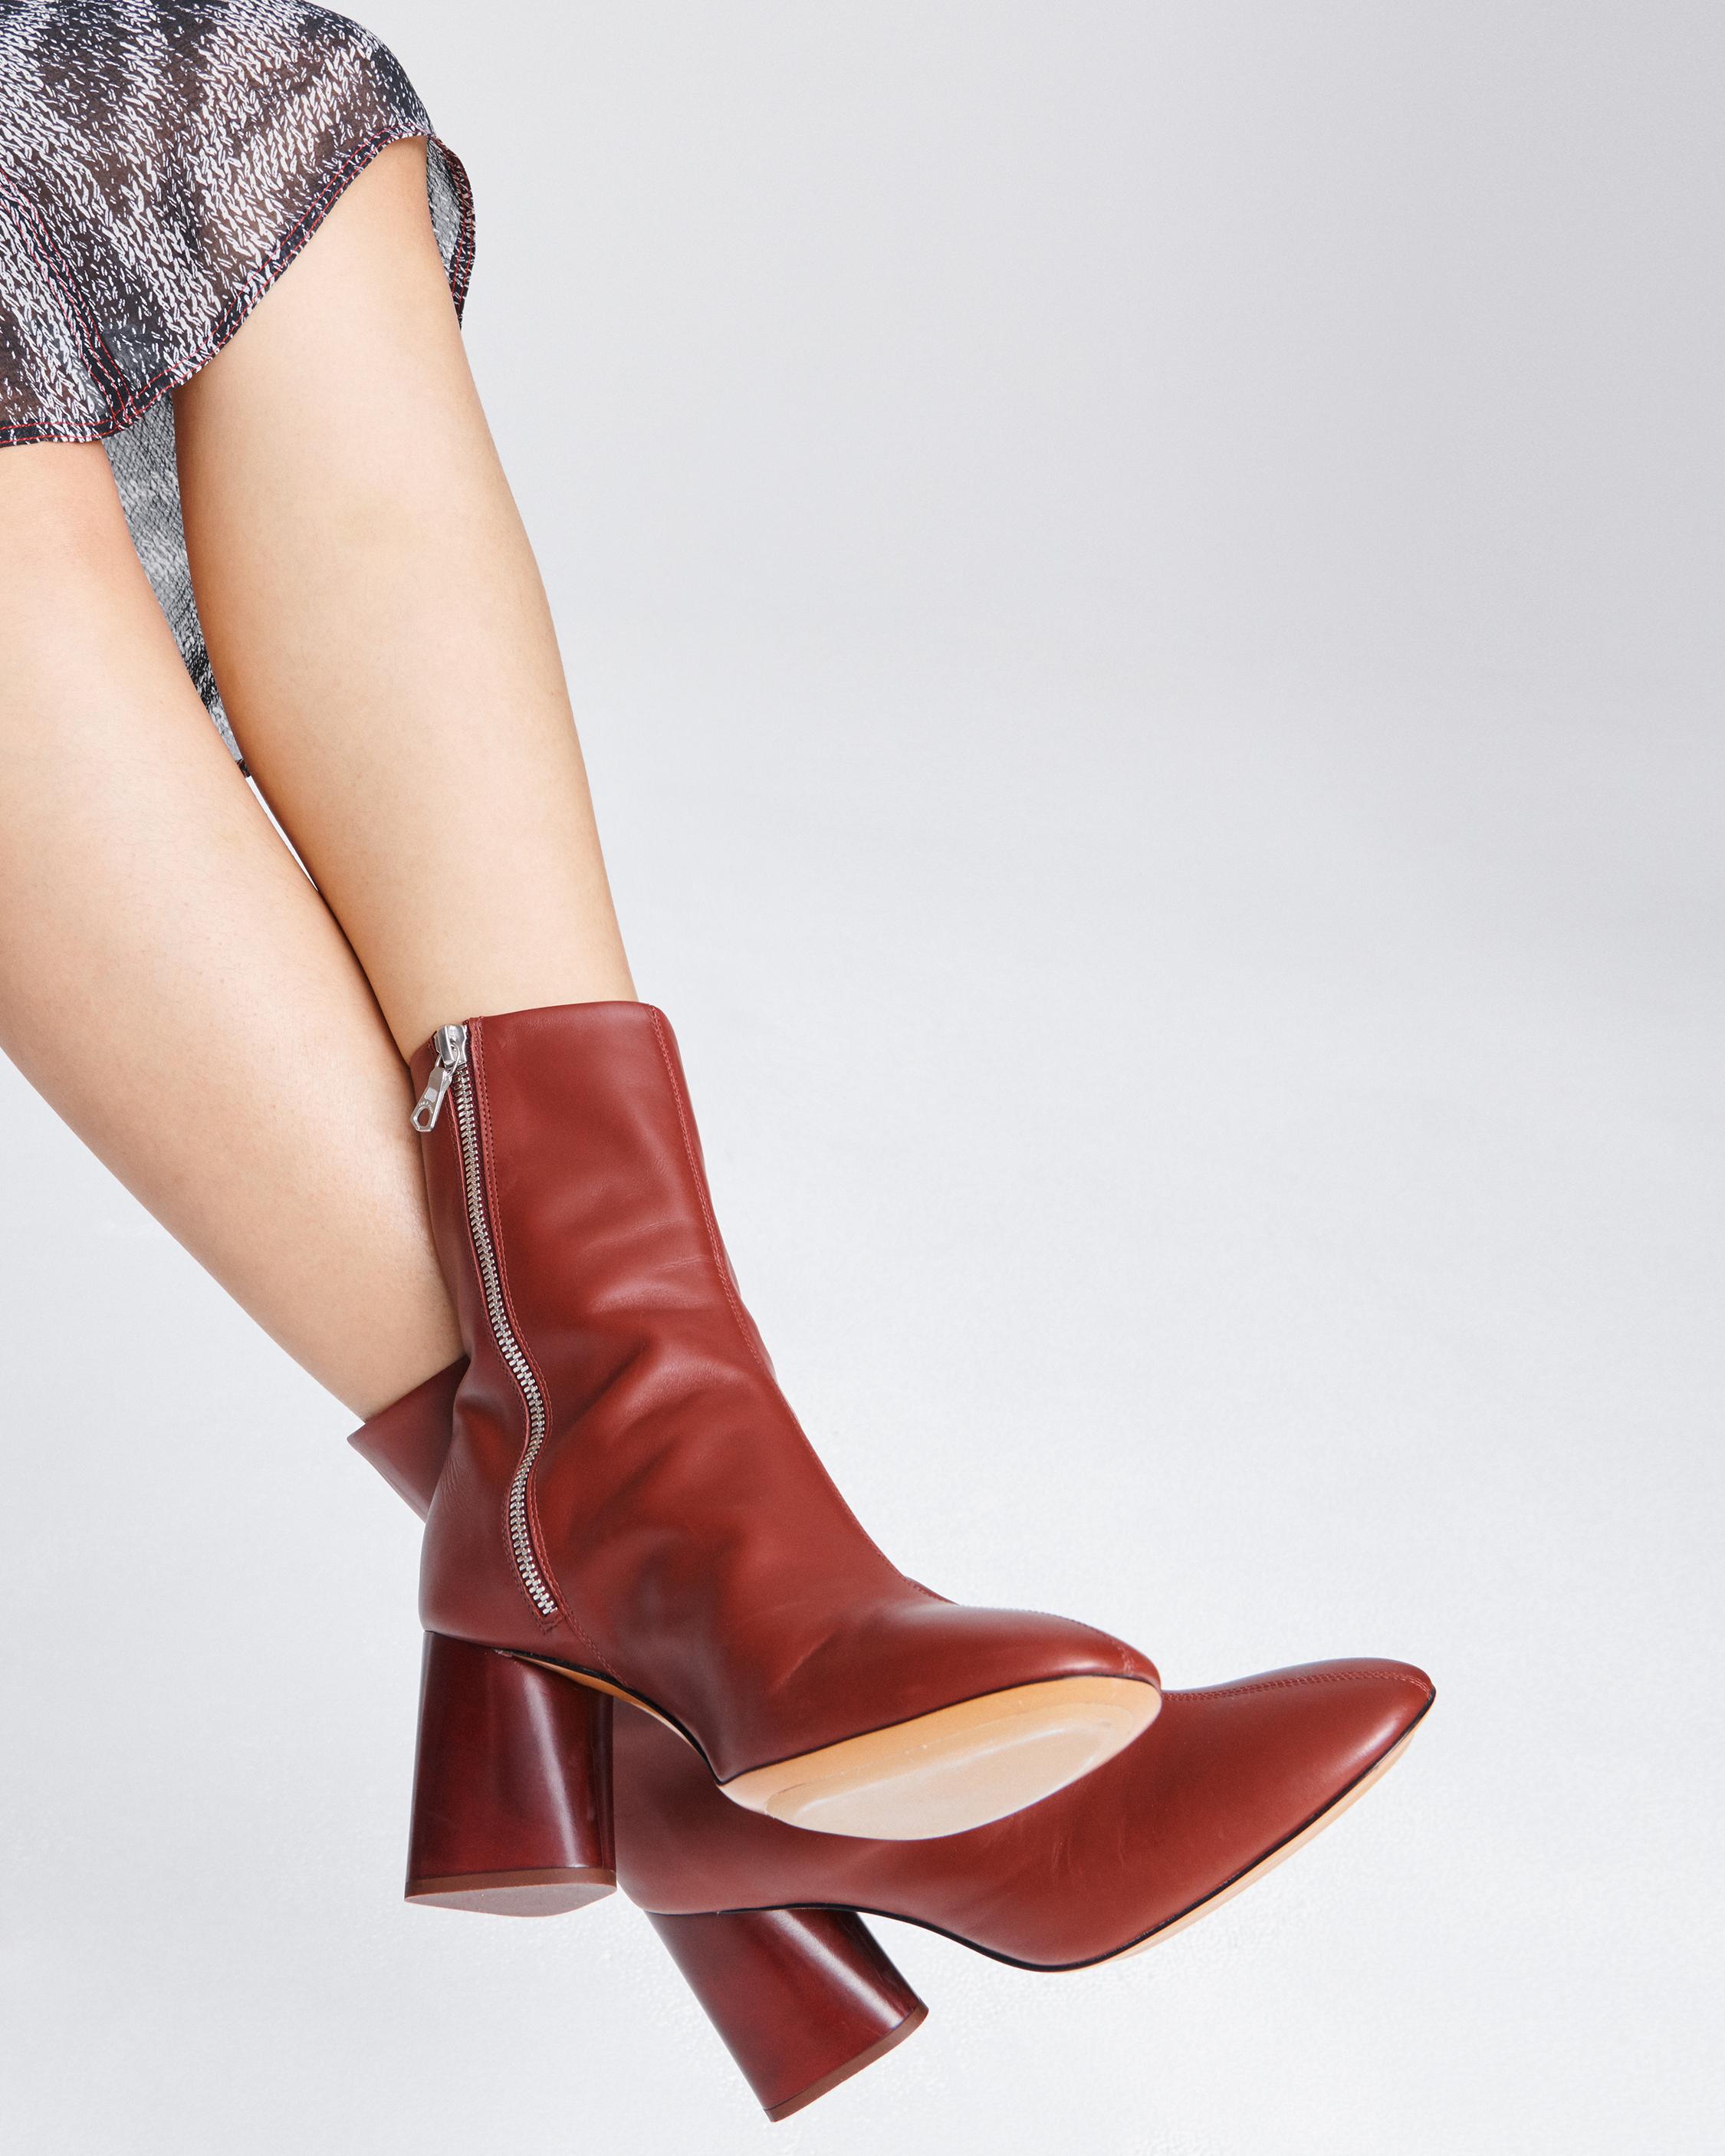 rag and bone red boots